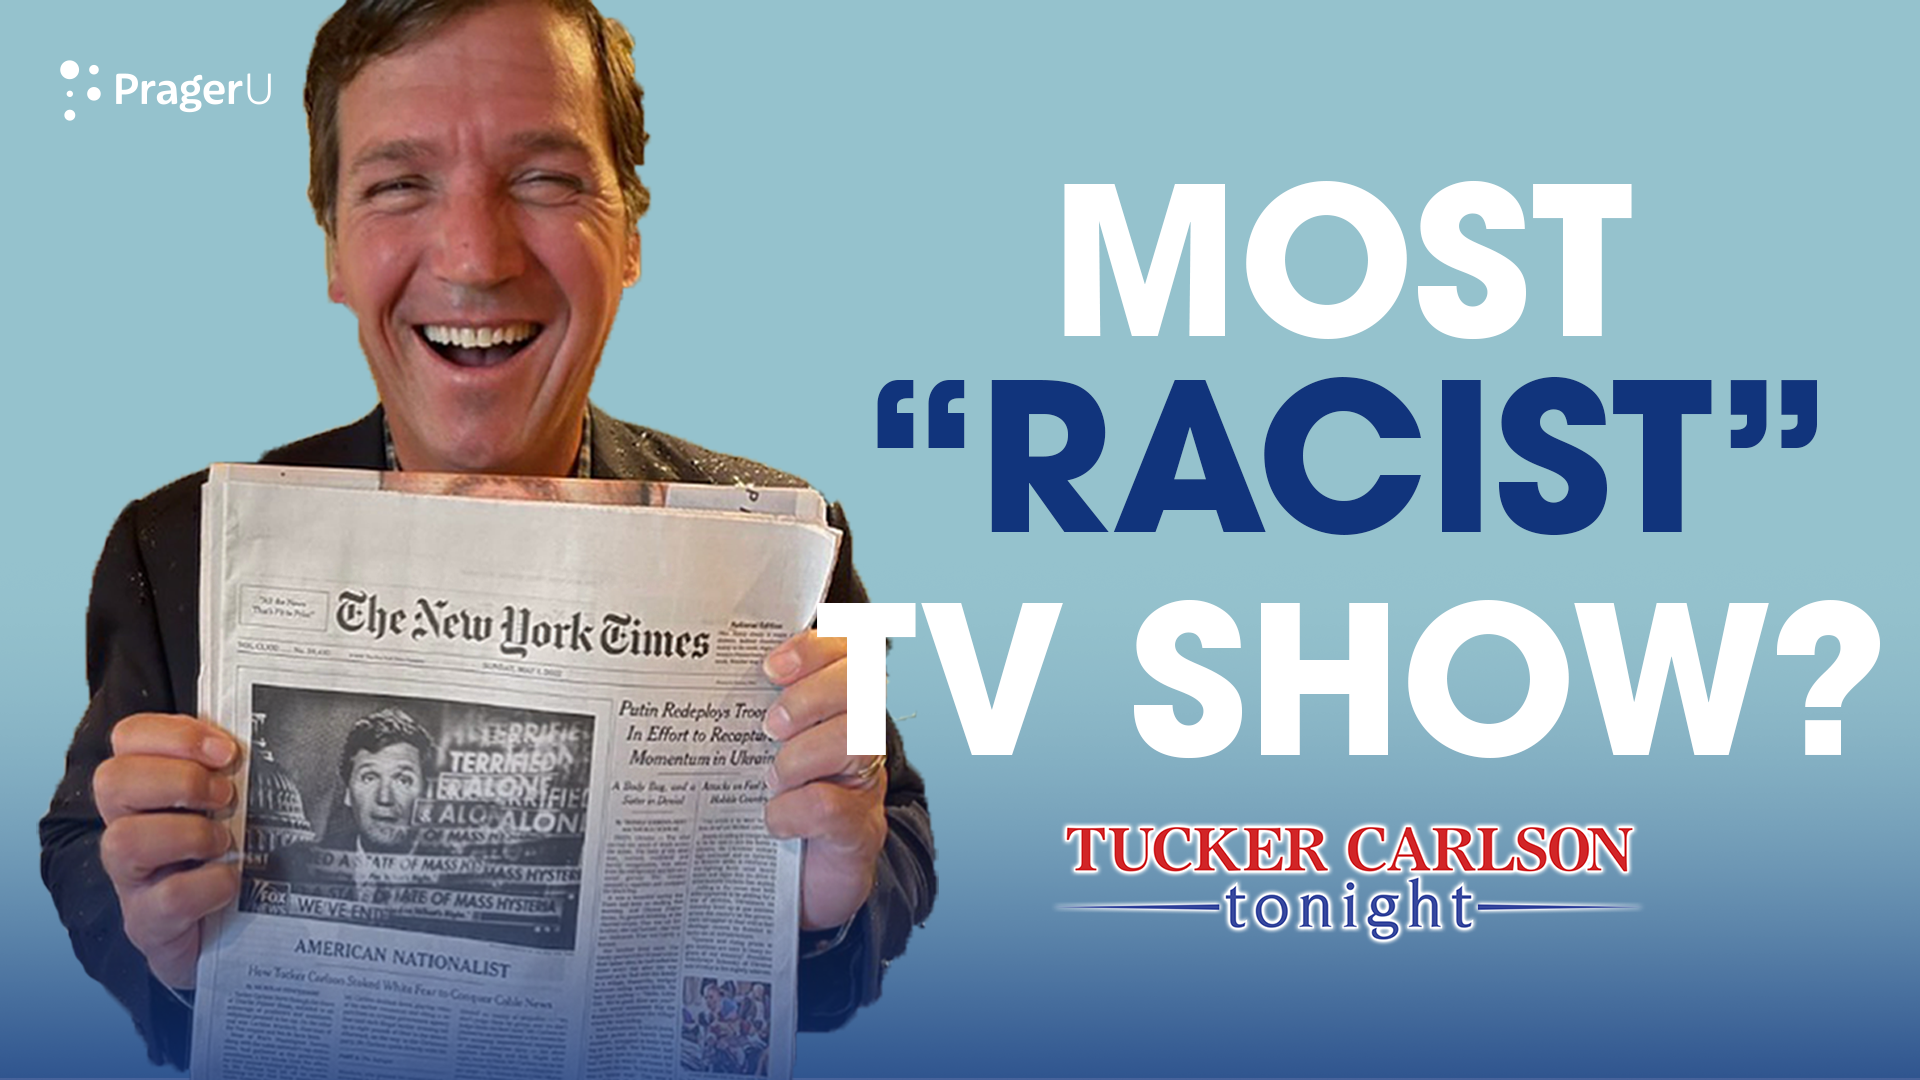 NYT: Tucker Carlson Tonight Is “Most Racist Show” in History: 5/2/2022